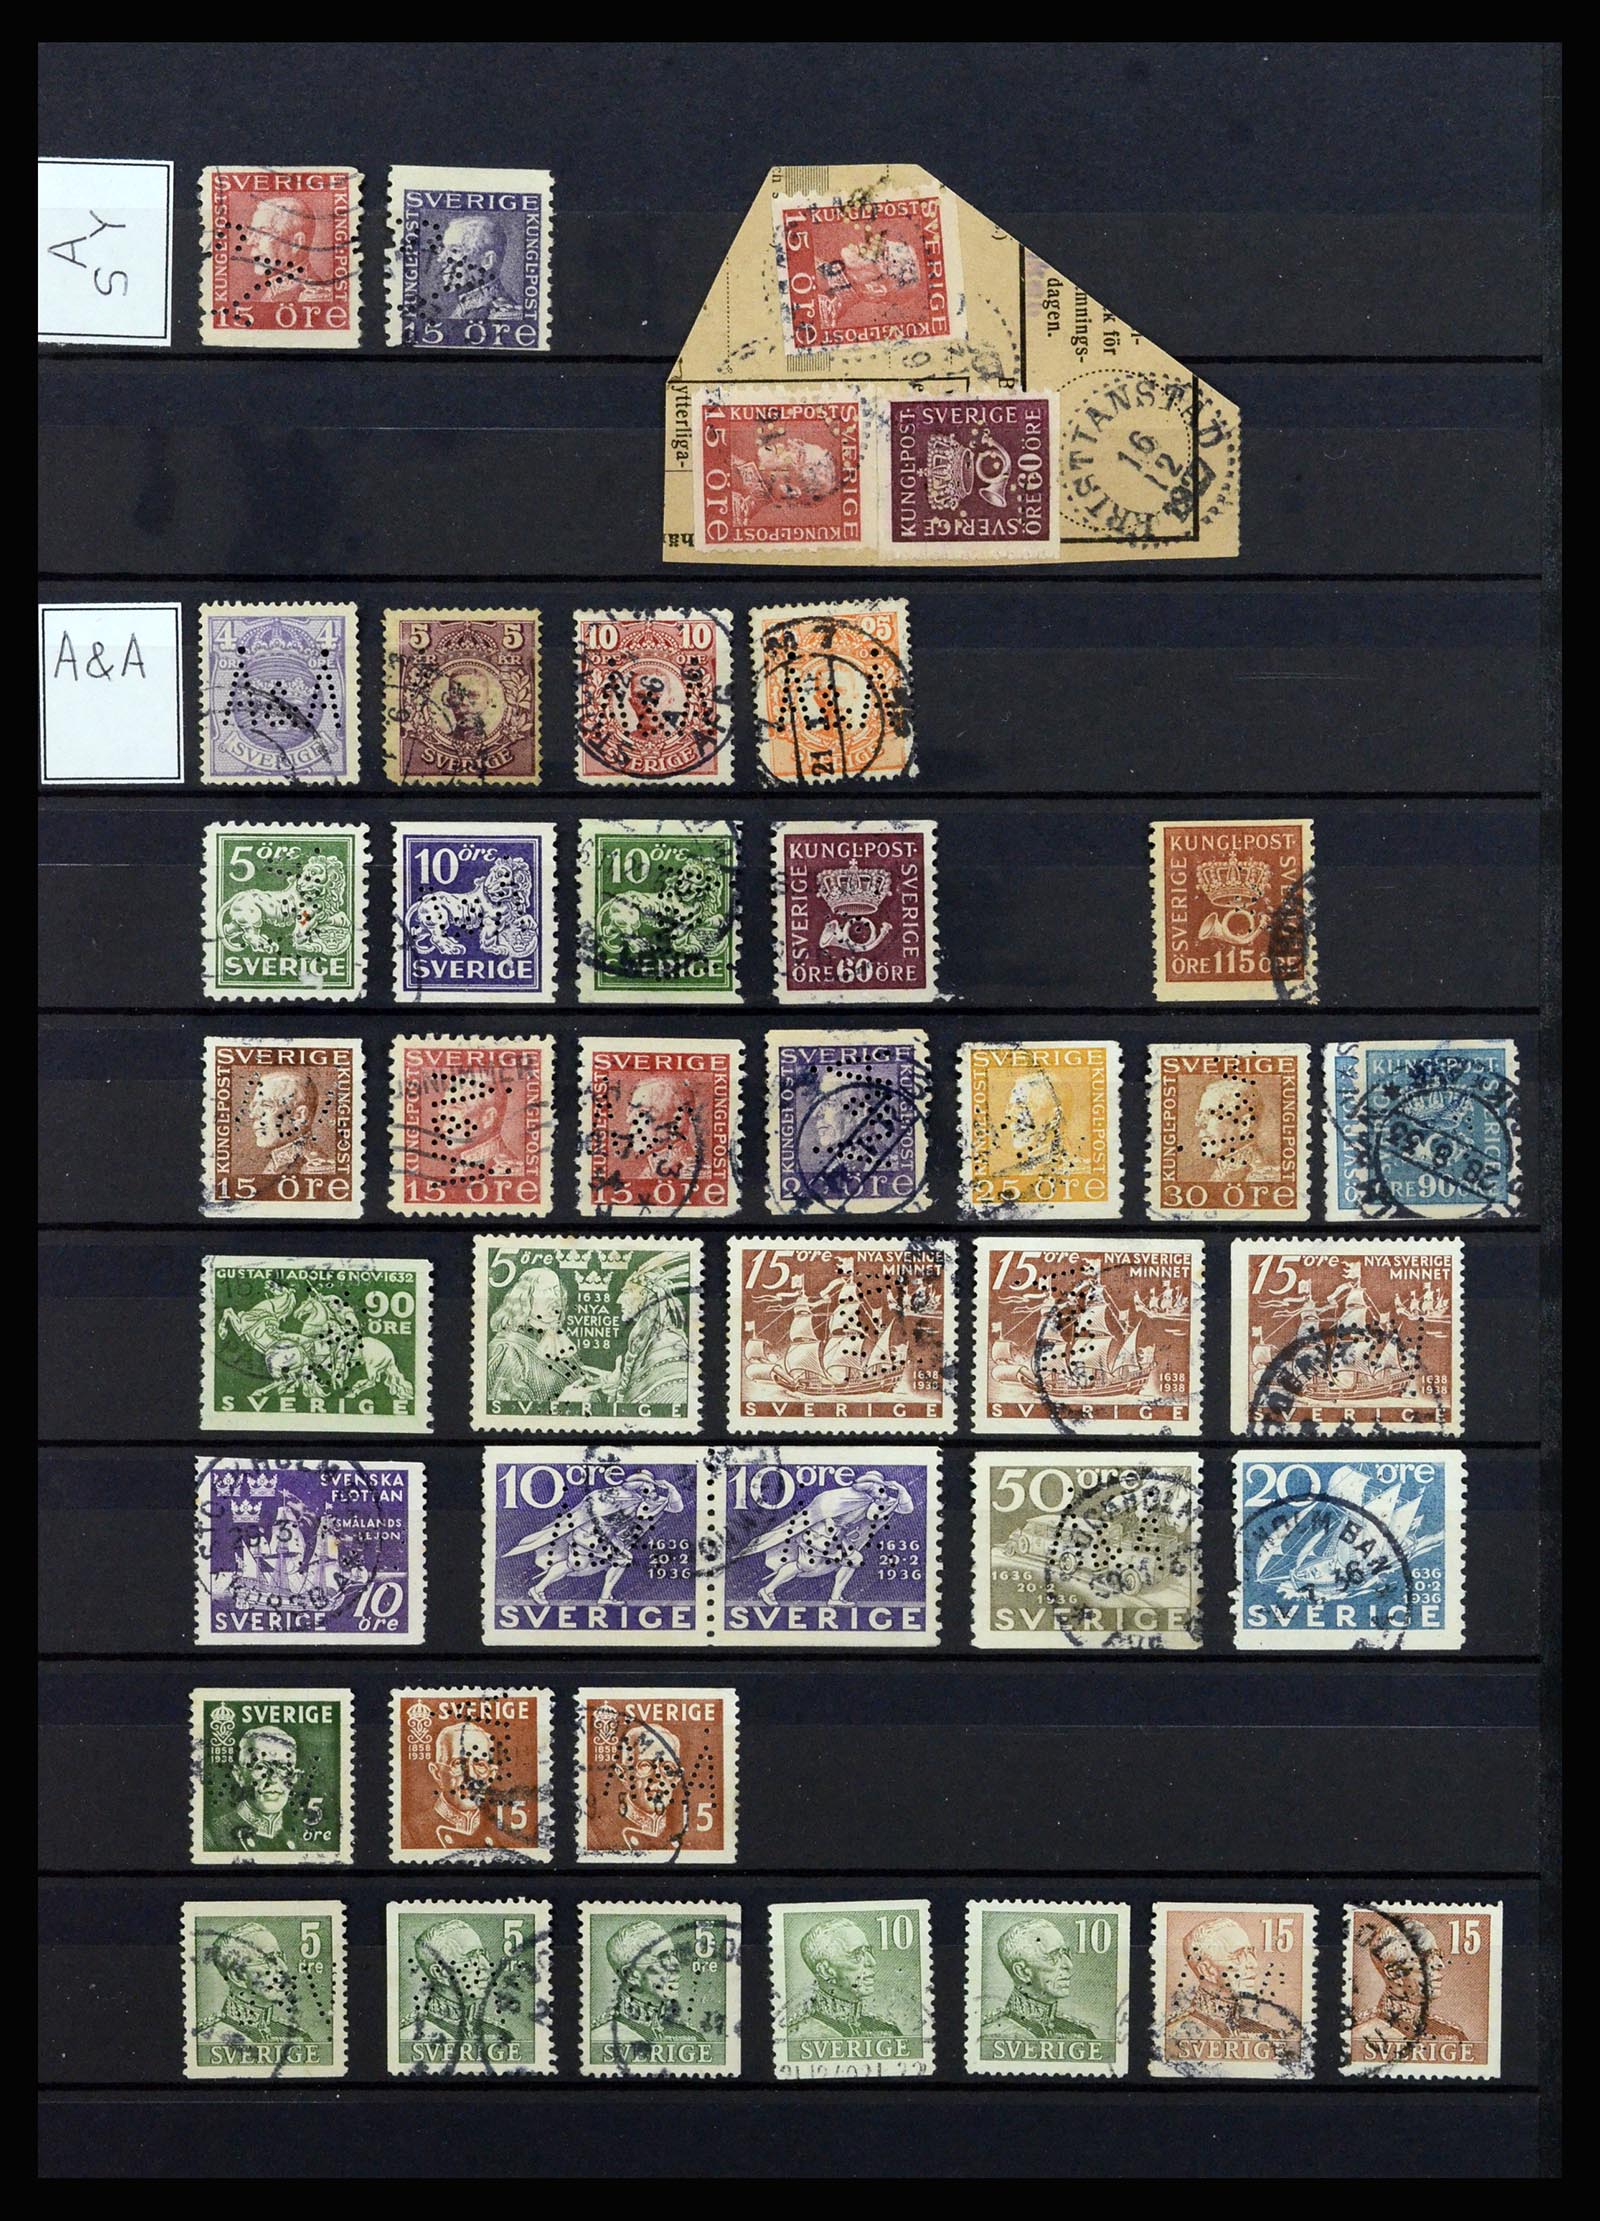 37057 060 - Stamp collection 37057 World perfins 1880-1950.